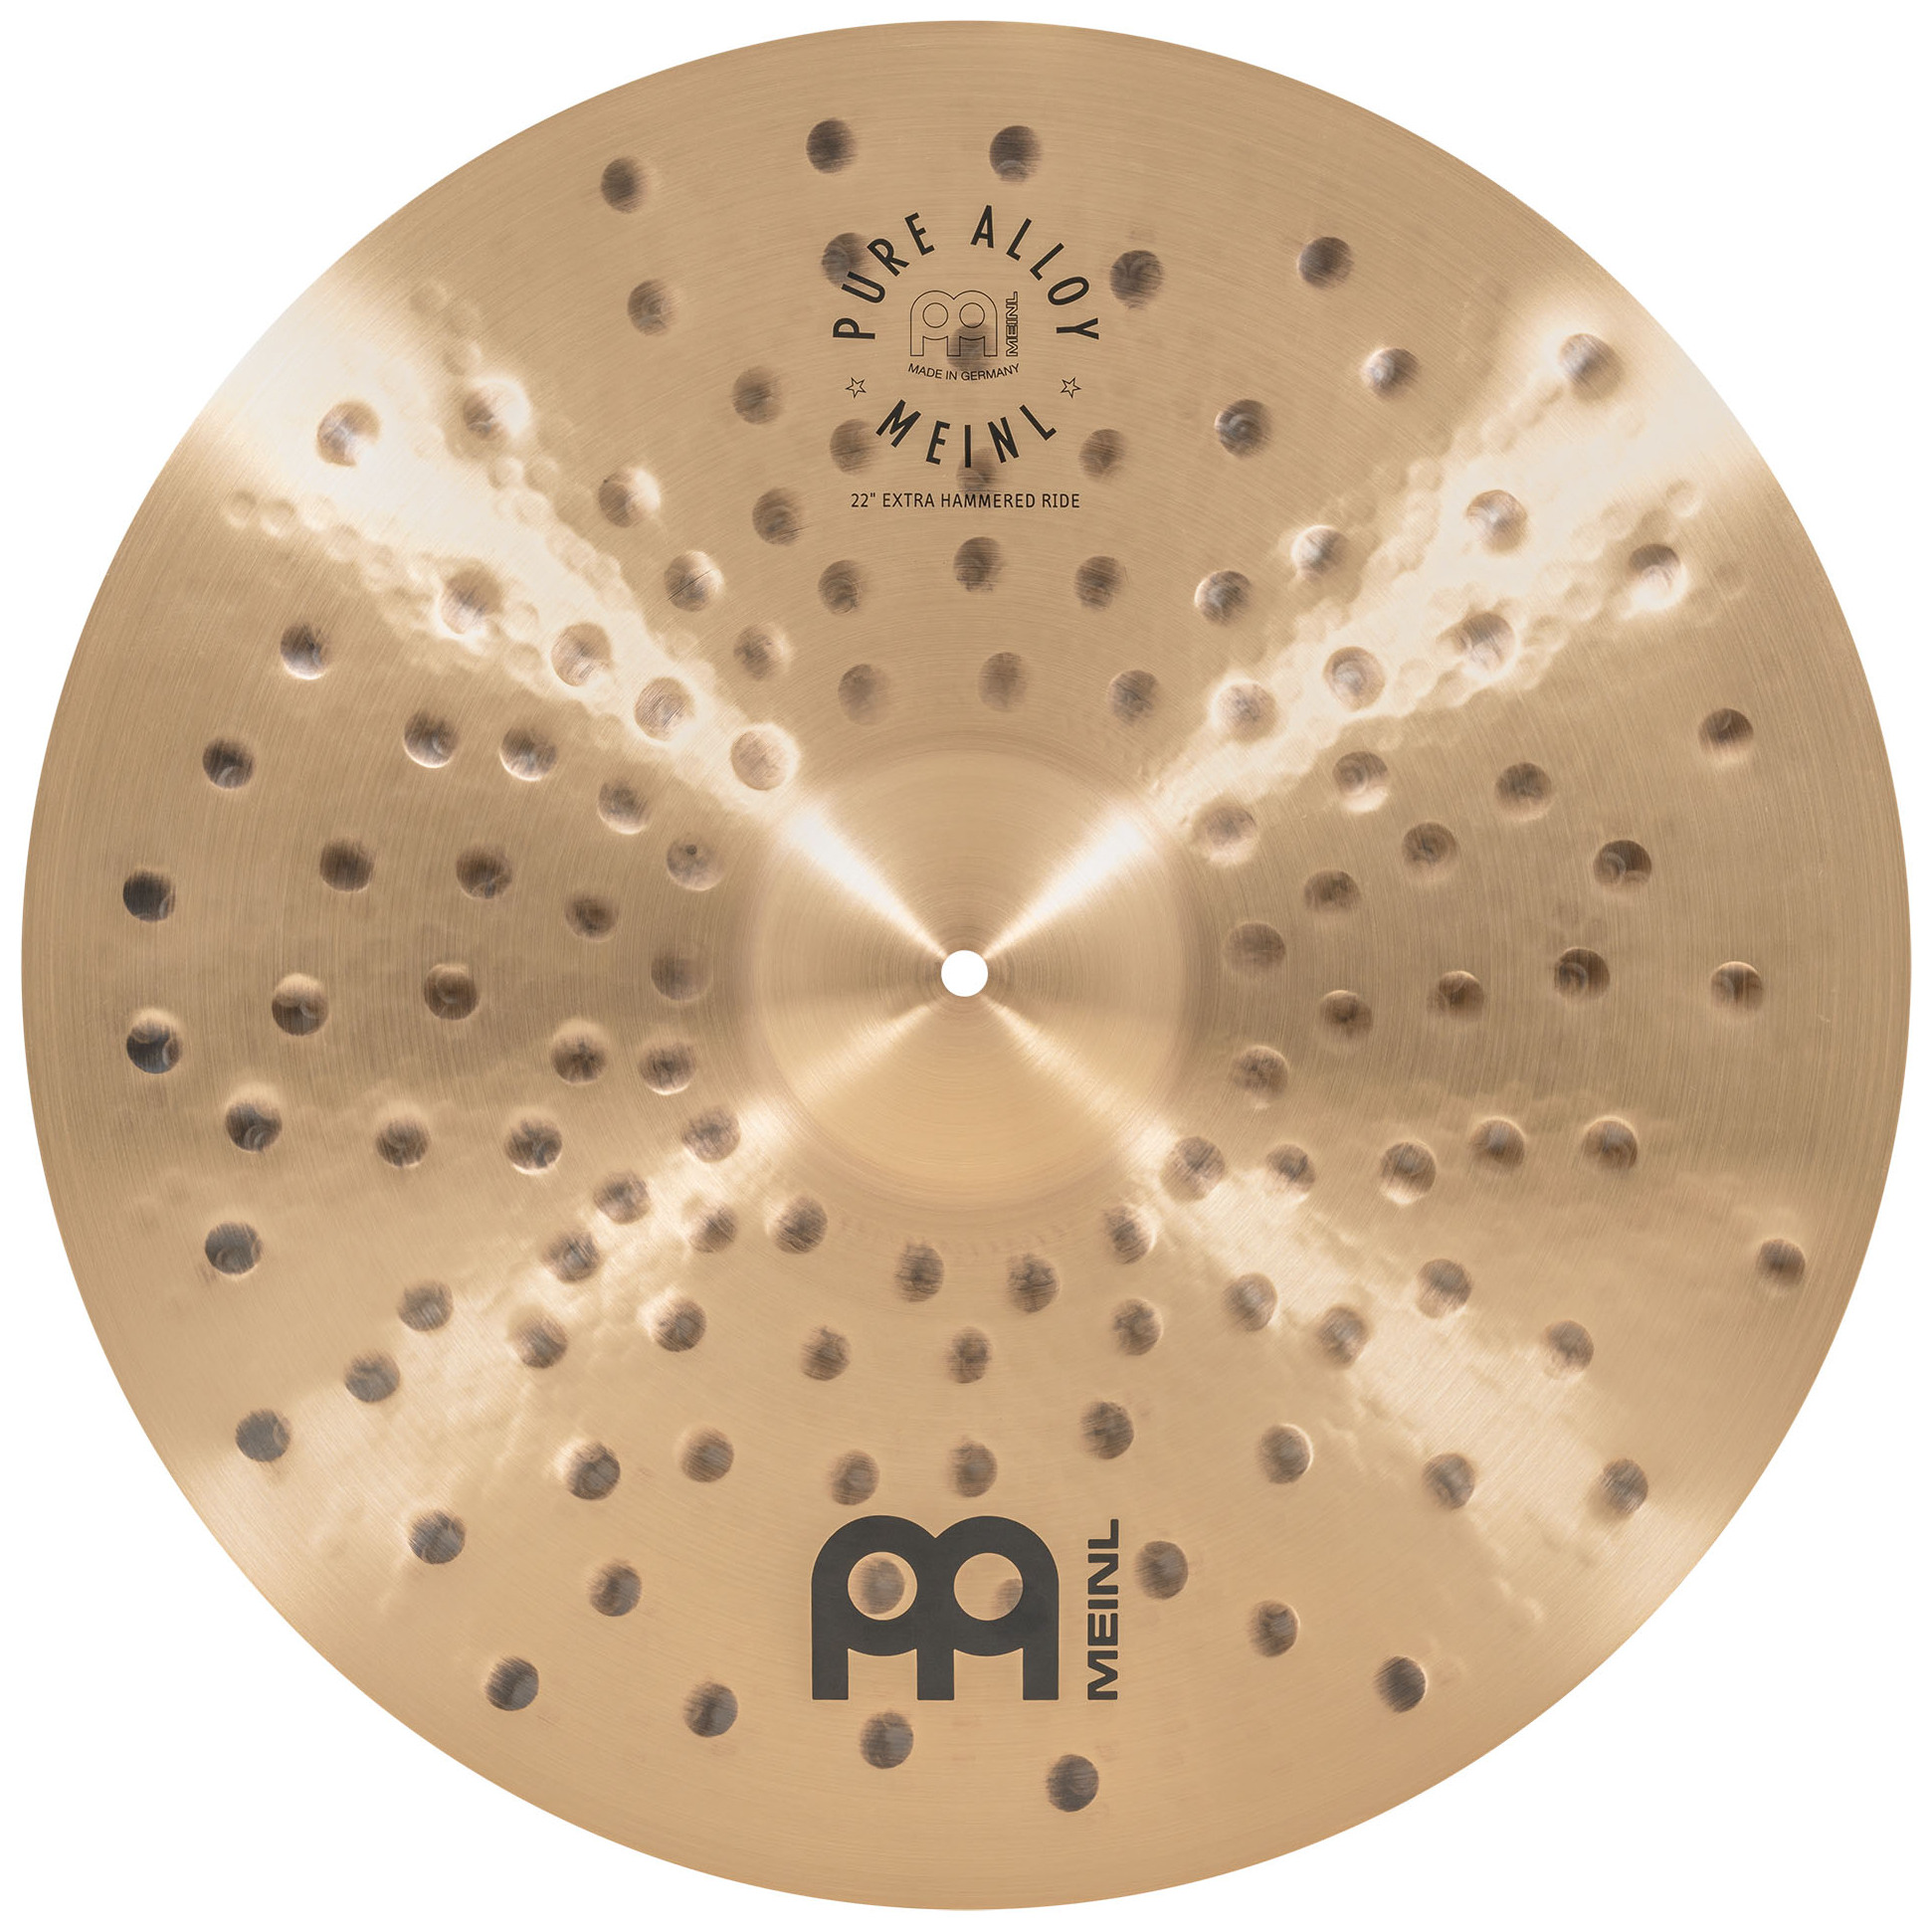 Meinl Cymbals PA22EHR - 22" Pure Alloy Extra Hammered Ride